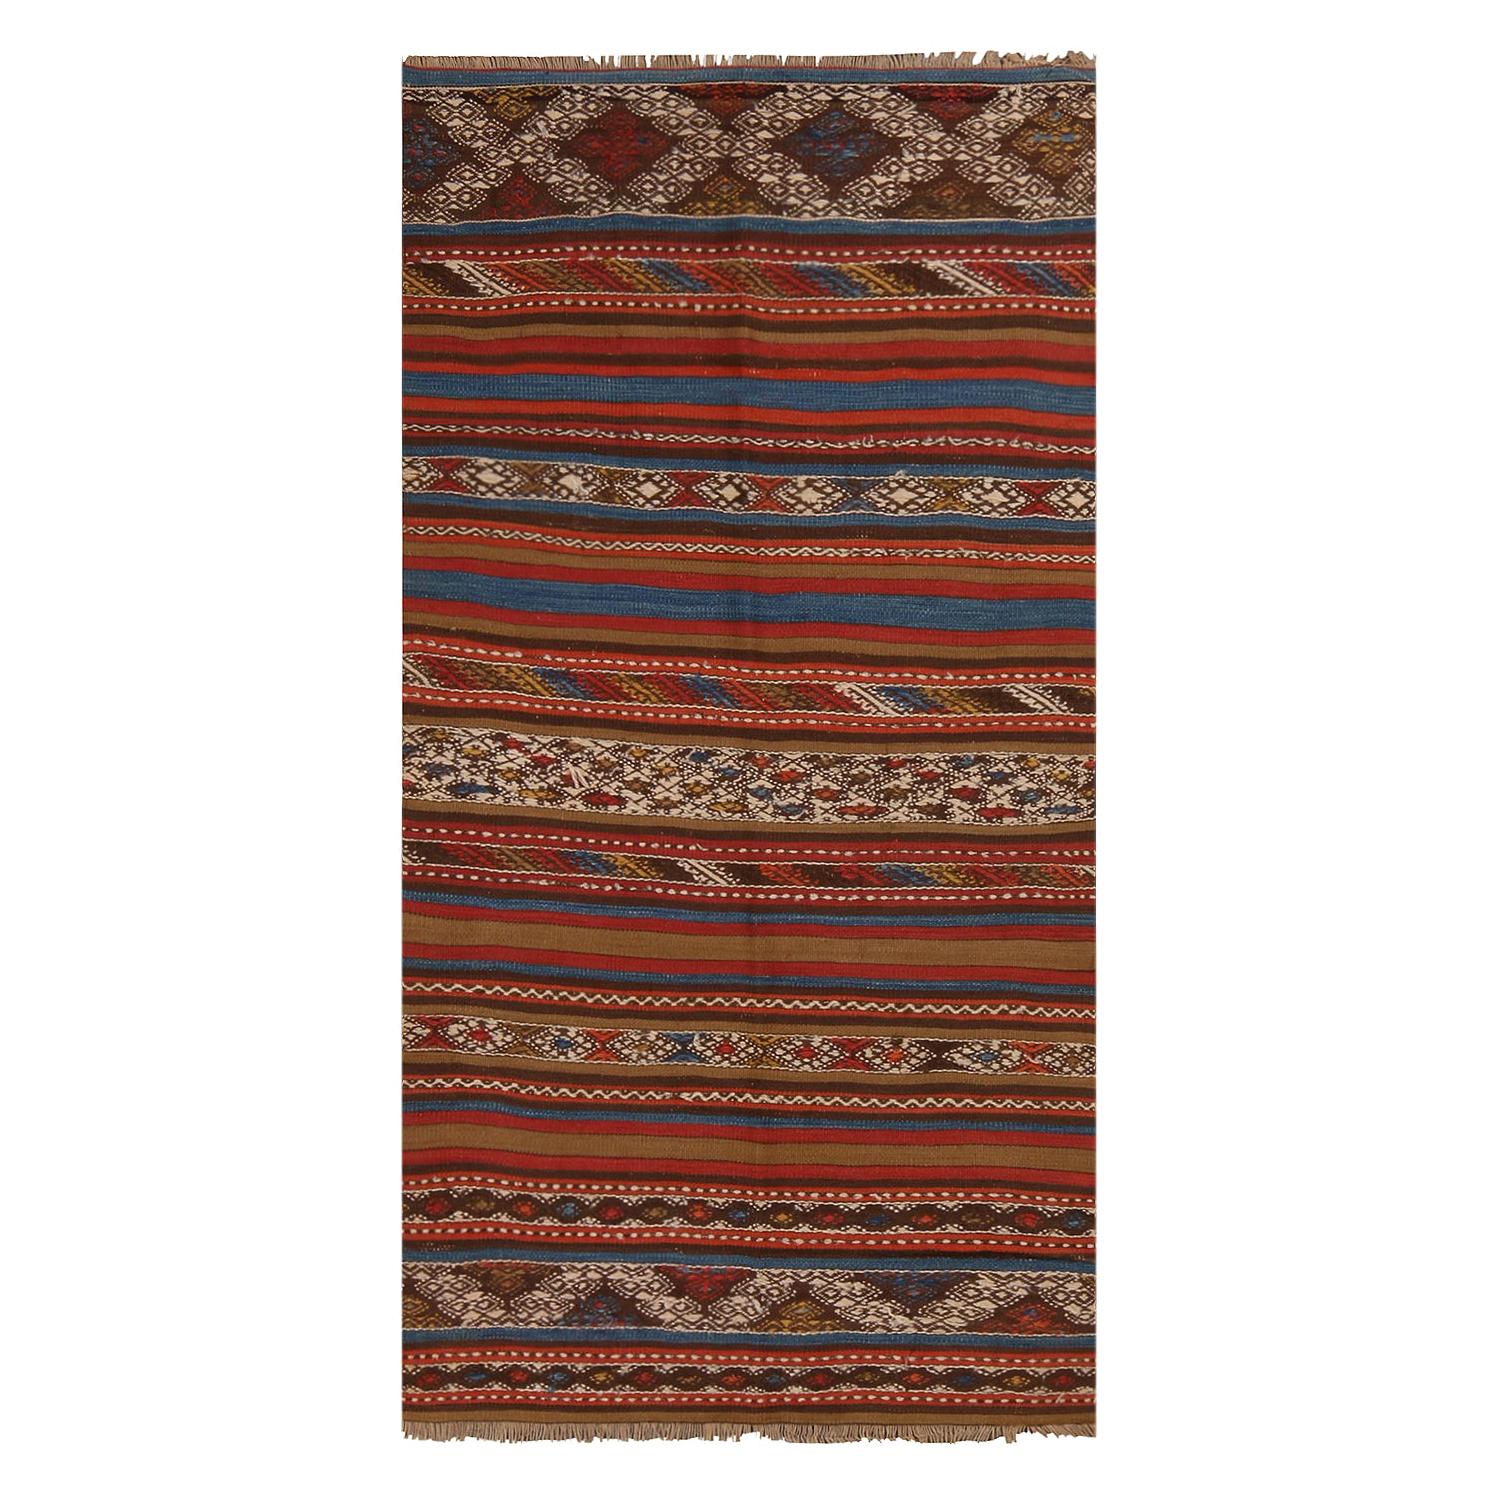 Bergama Geometric Brown and Red Wool Kilim Rug with Blue and White Accents